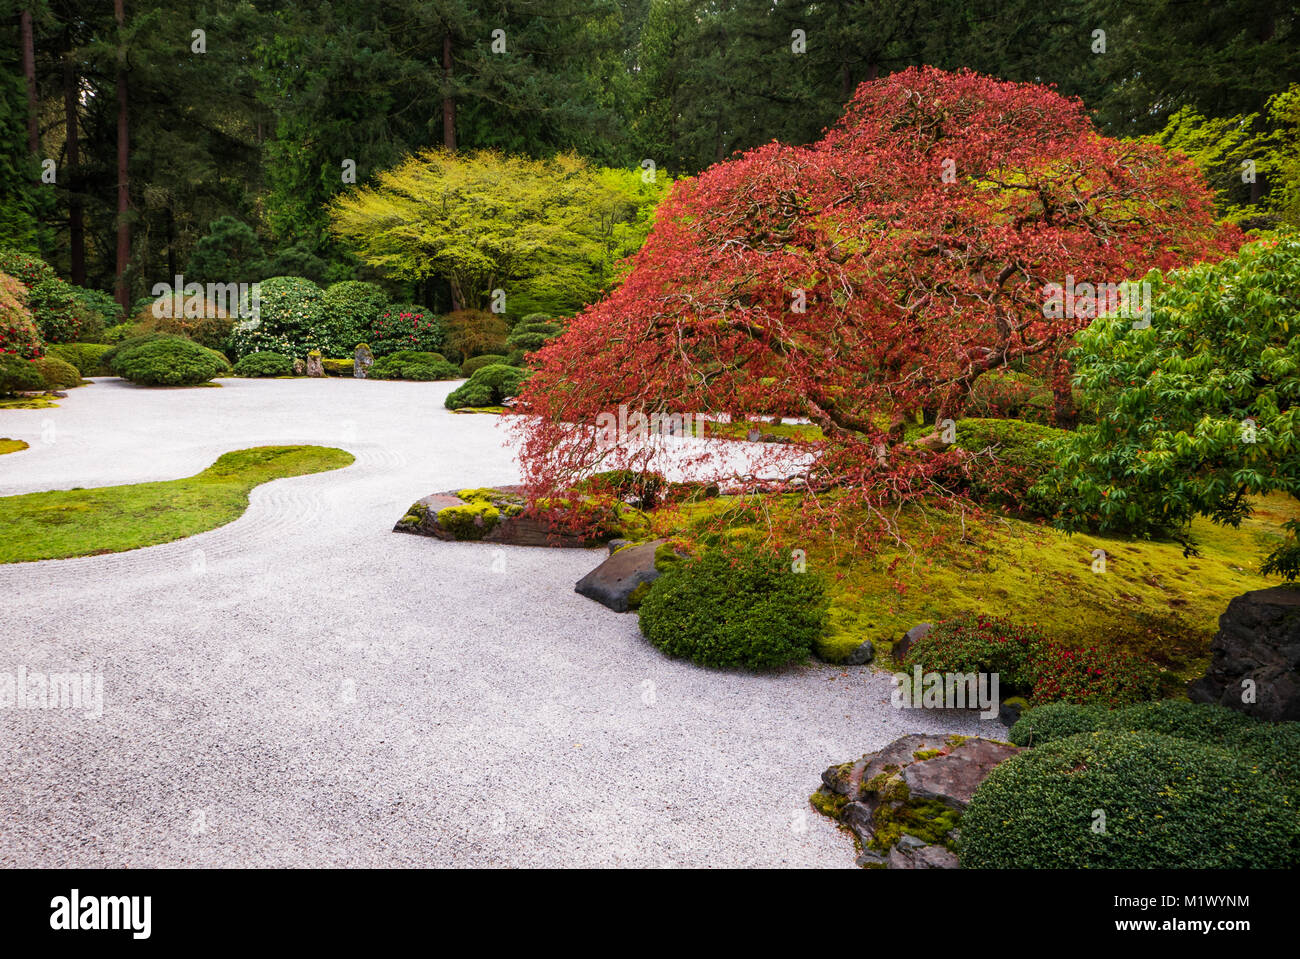 Japanese Rock Garden With A Colorful Maple Tree Stock Photo